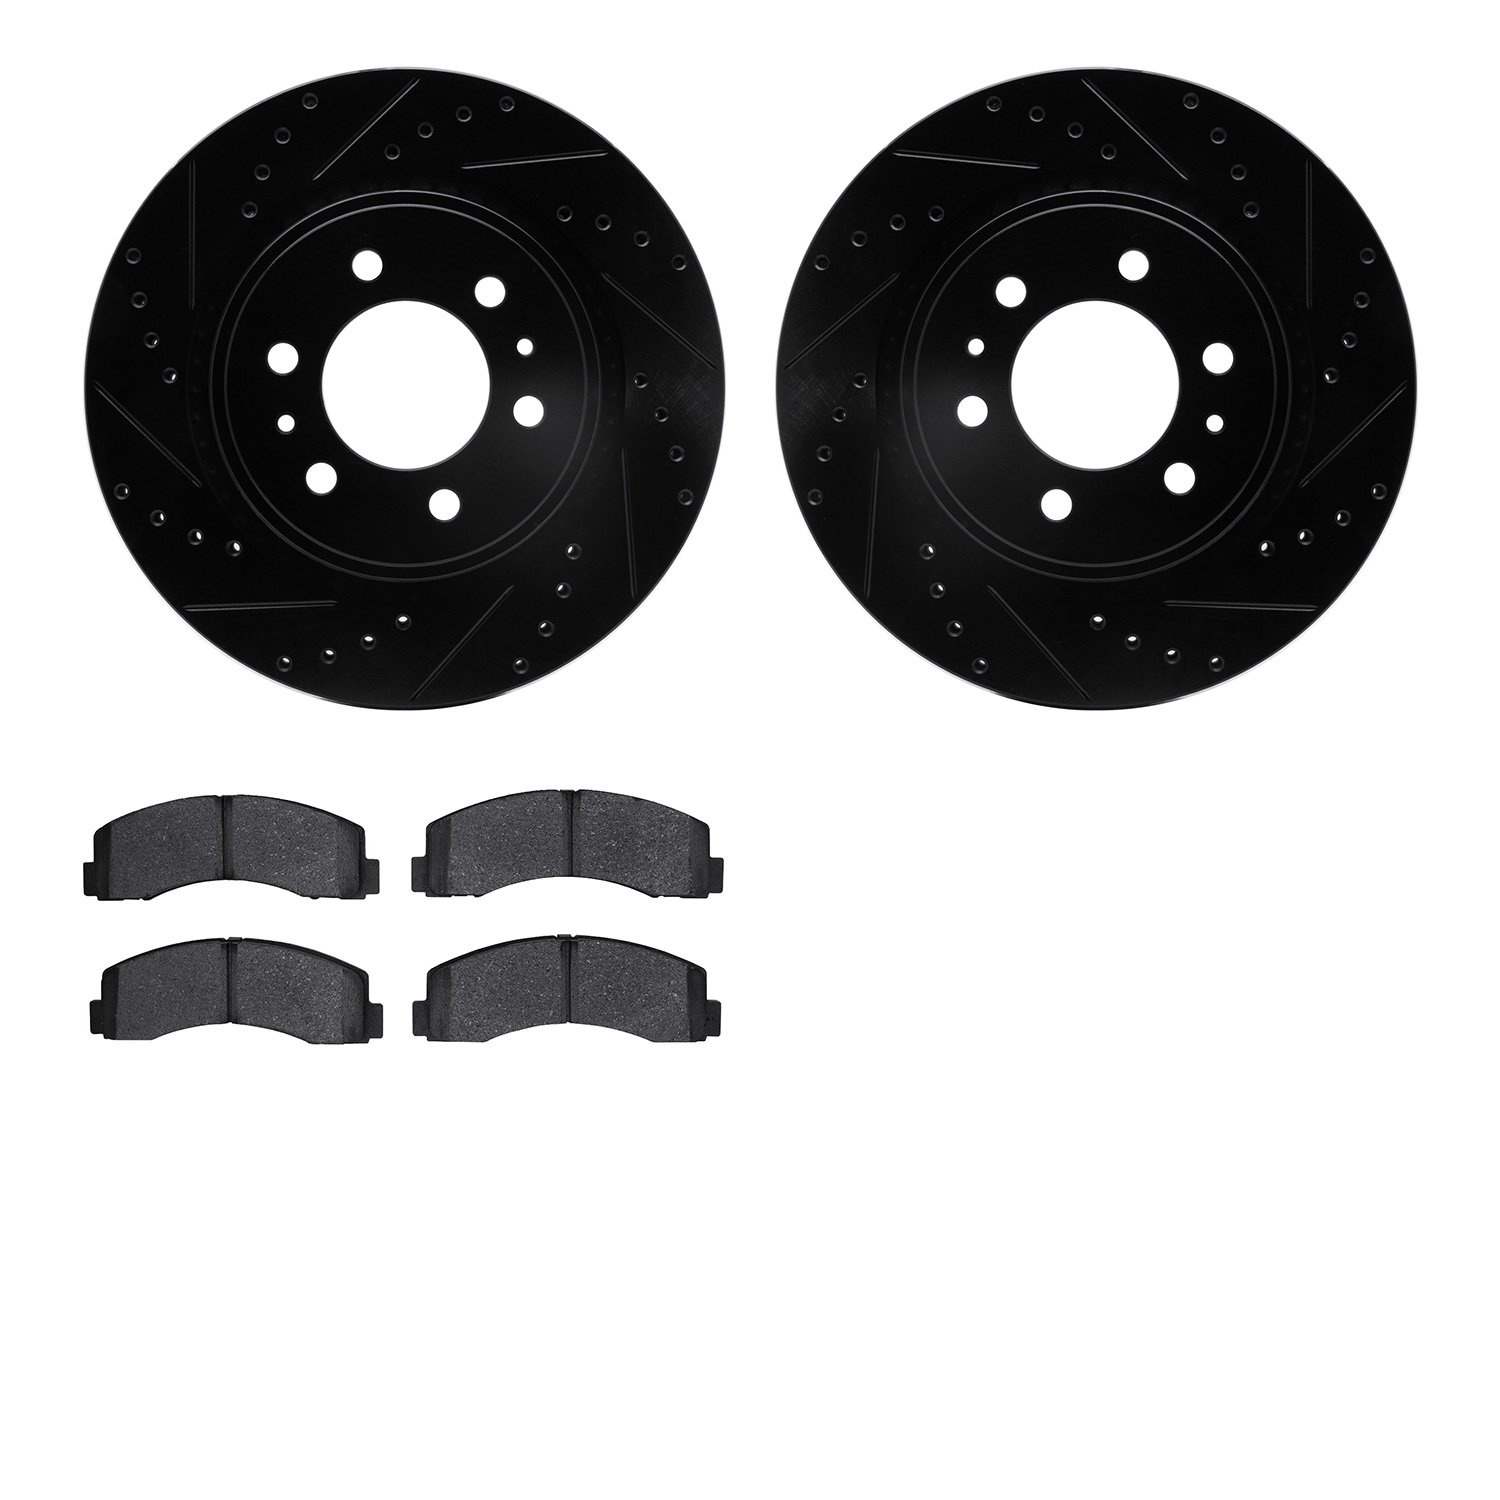 8402-54089 Drilled/Slotted Brake Rotors with Ultimate-Duty Brake Pads Kit [Black], 2010-2021 Ford/Lincoln/Mercury/Mazda, Positio